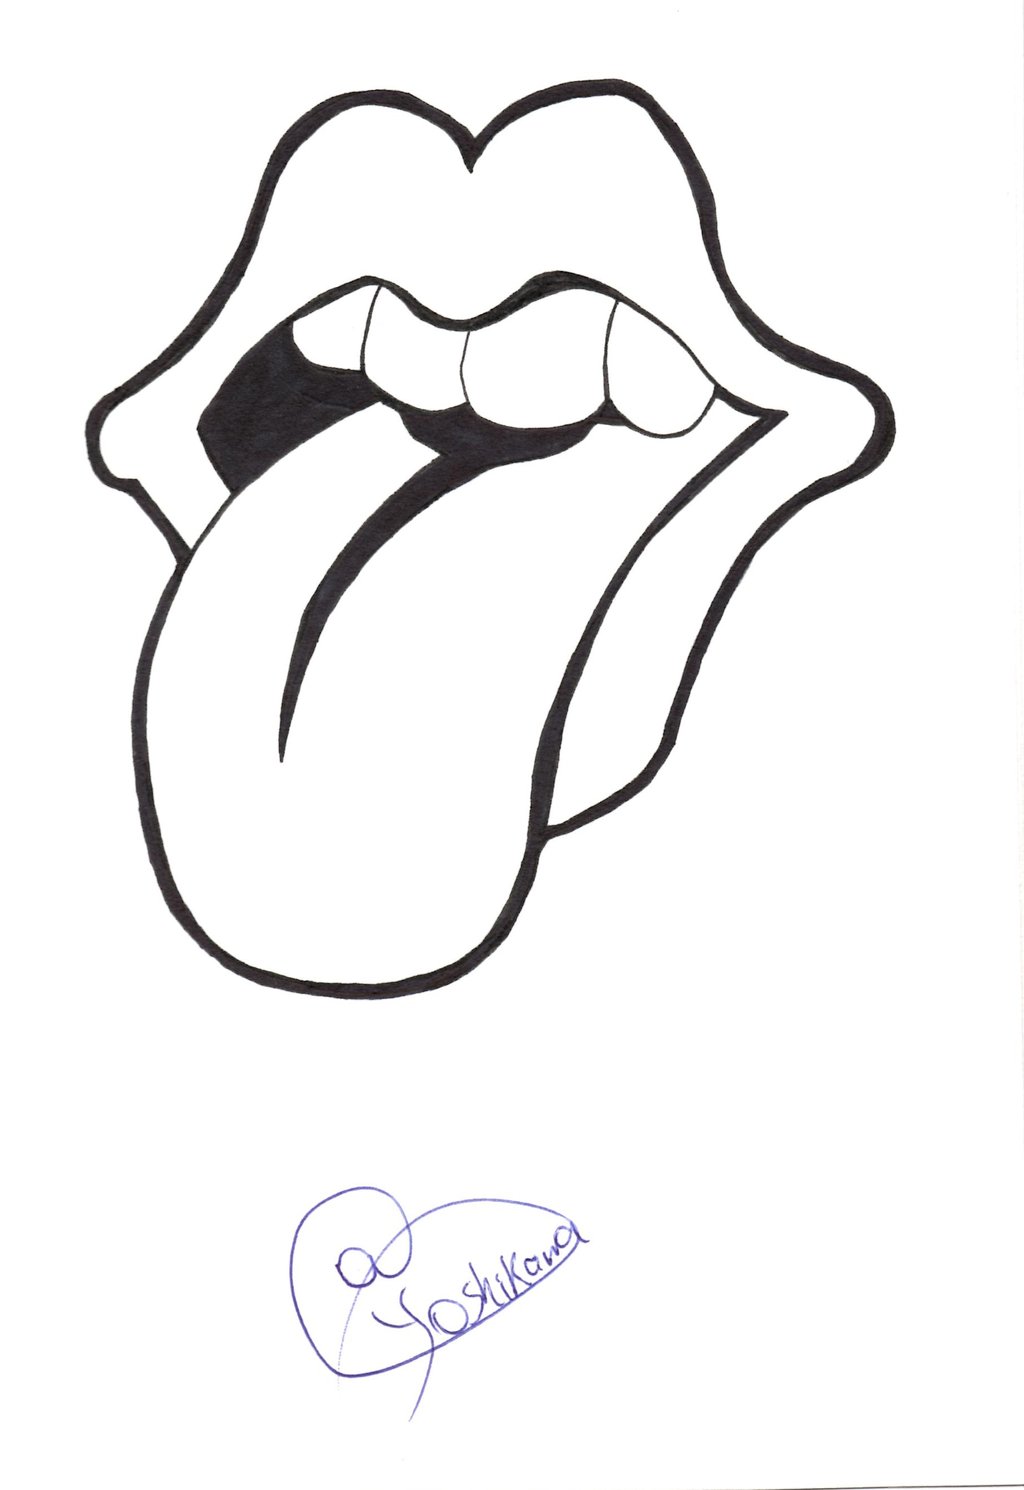 Rolling Stones Logo by BrainGlitches